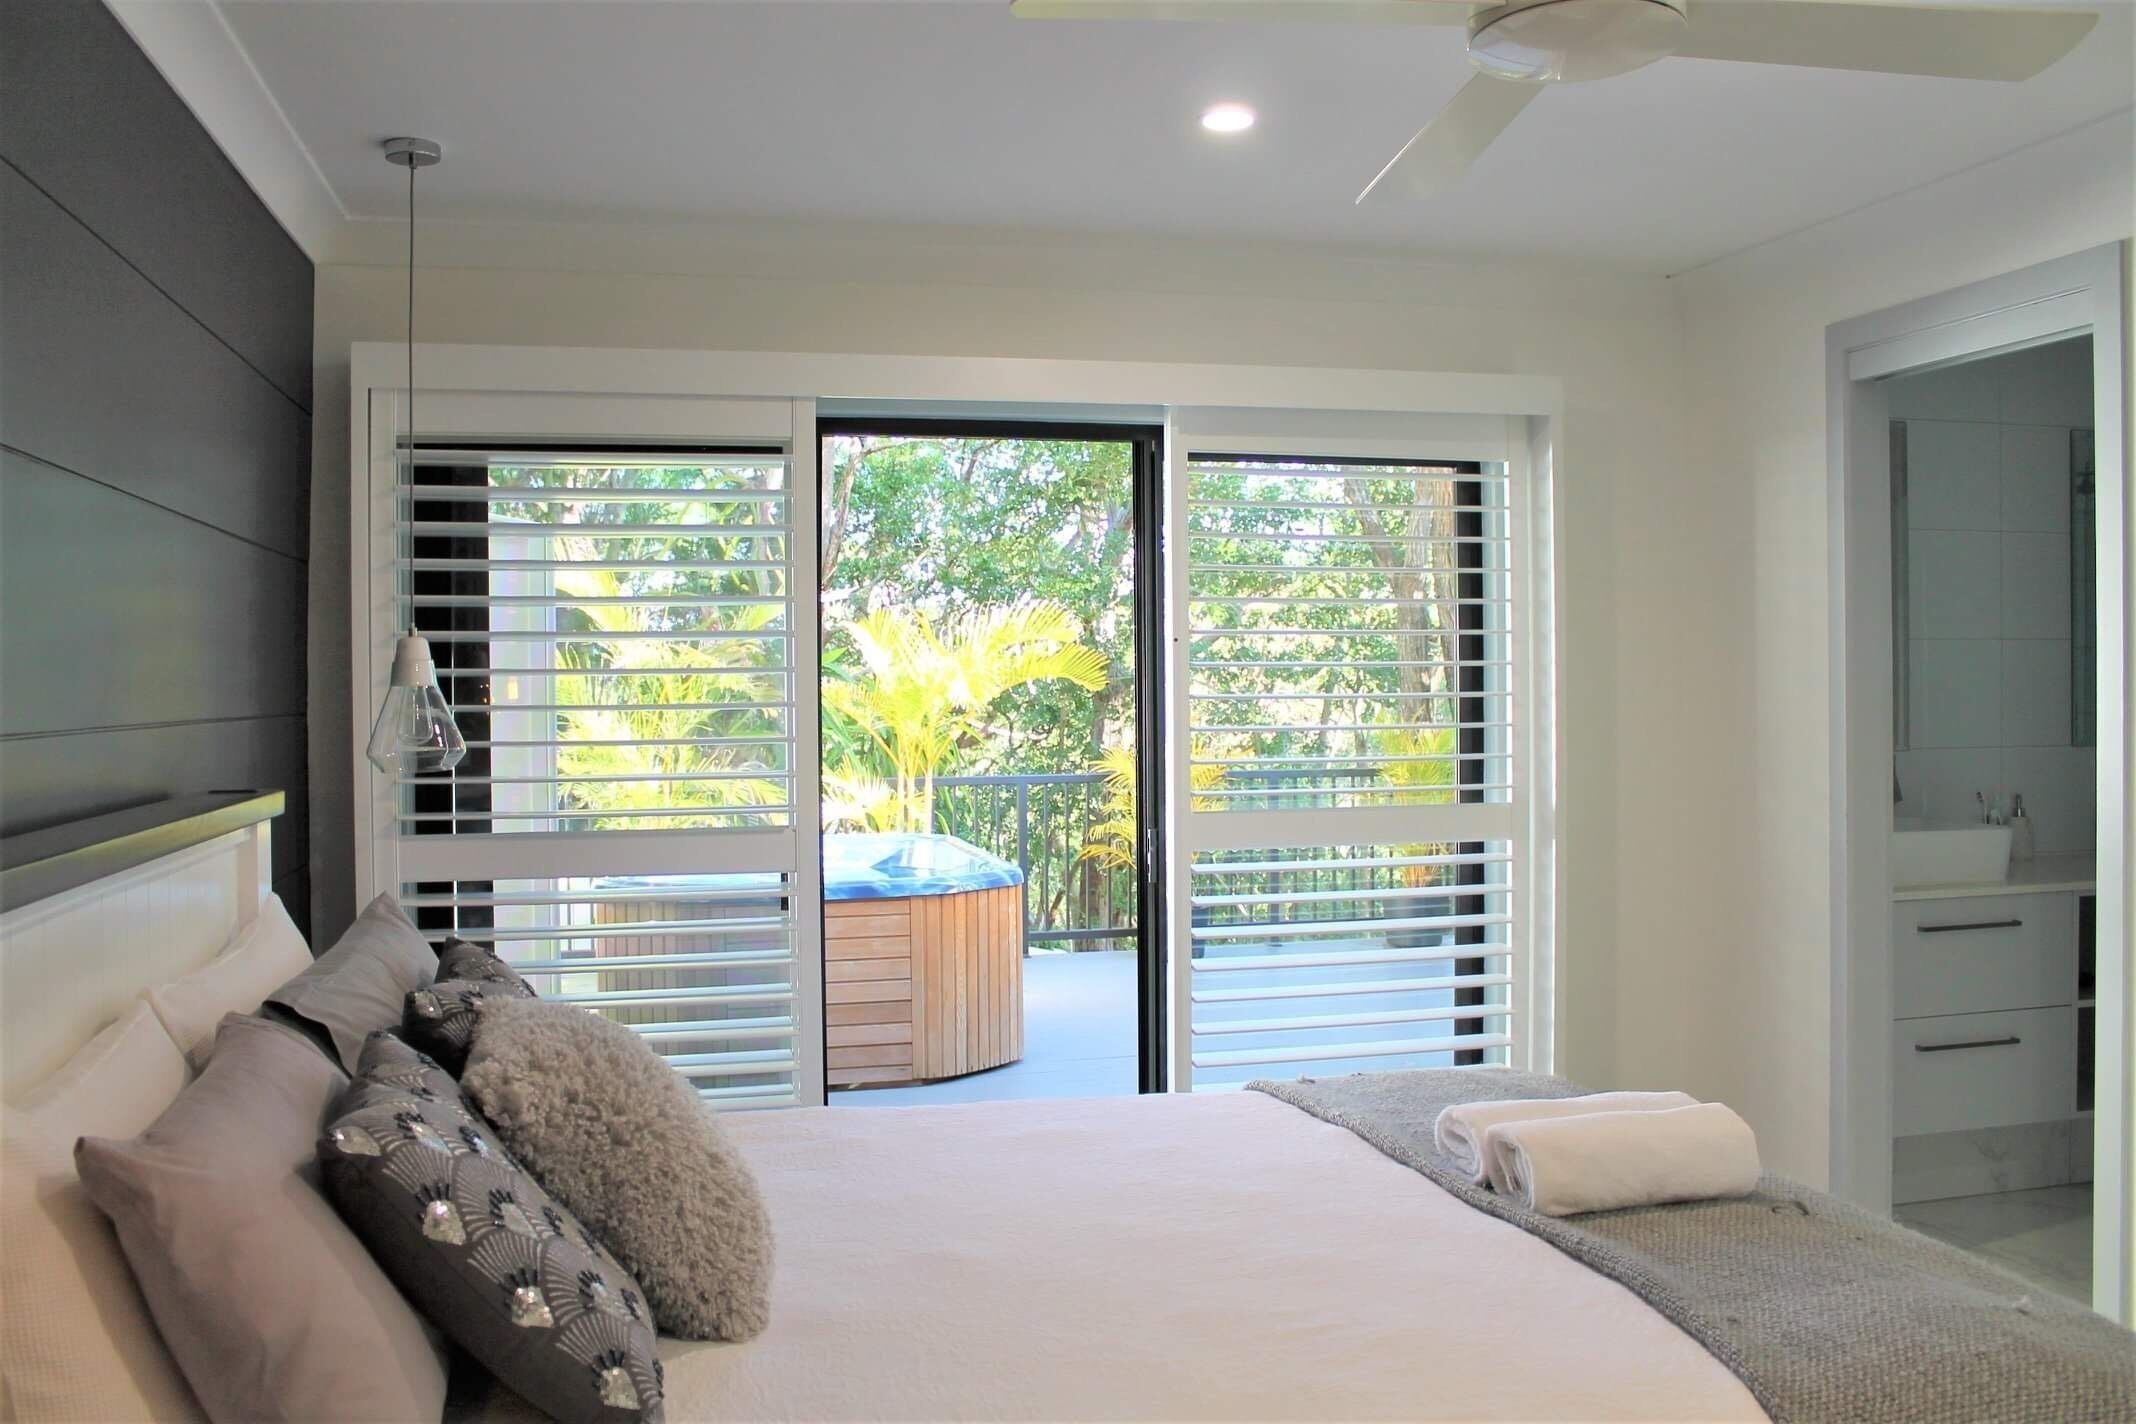 Private Access to the Beach, Ocean Views & Outdoor Spa - Central Location